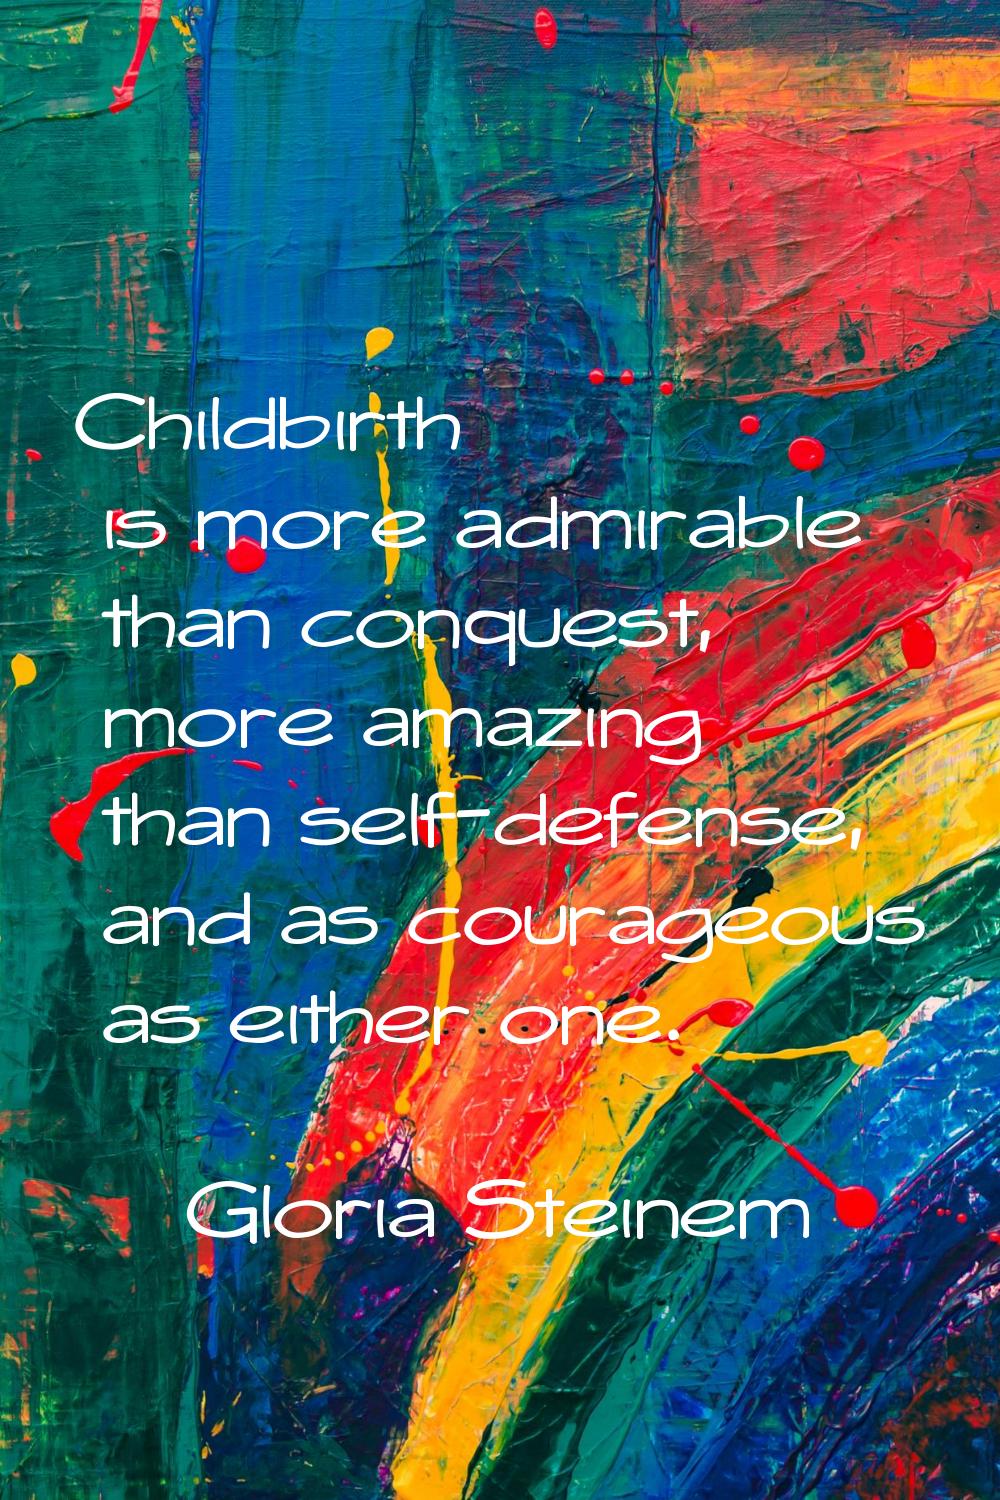 Childbirth is more admirable than conquest, more amazing than self-defense, and as courageous as ei